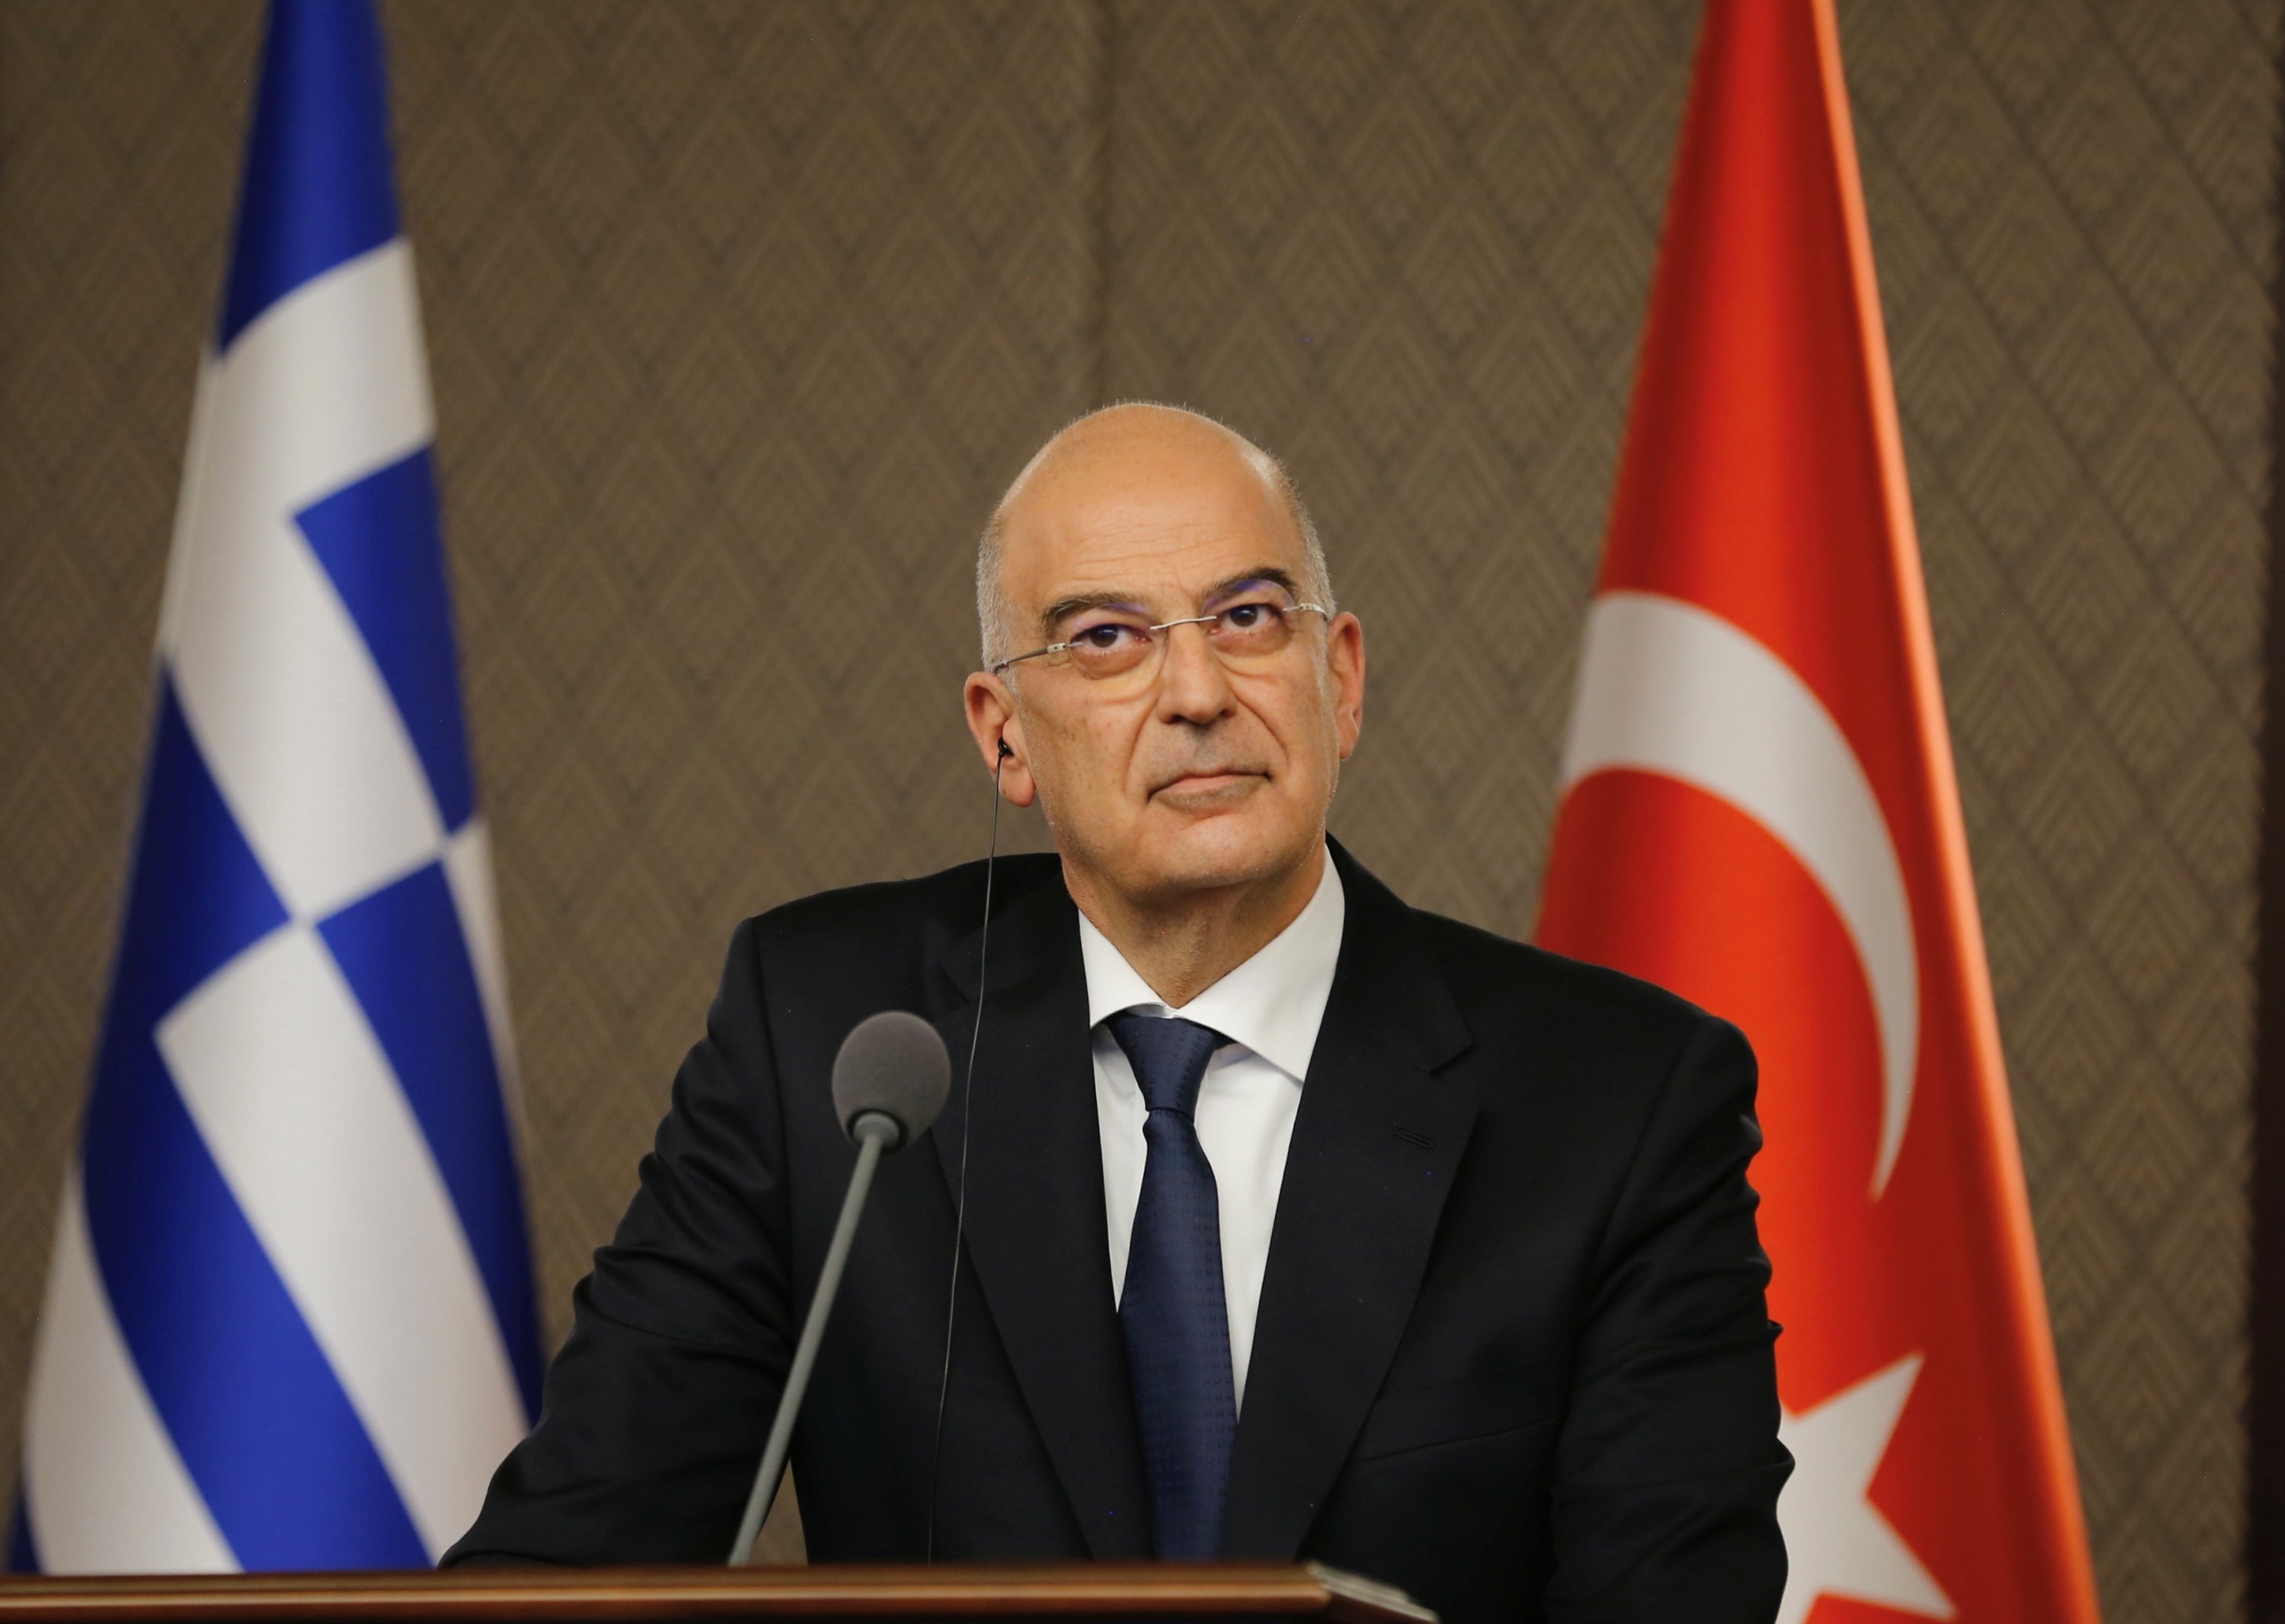 Greece Claims Desire To Have Positive Agenda With Turkey Daily Sabah